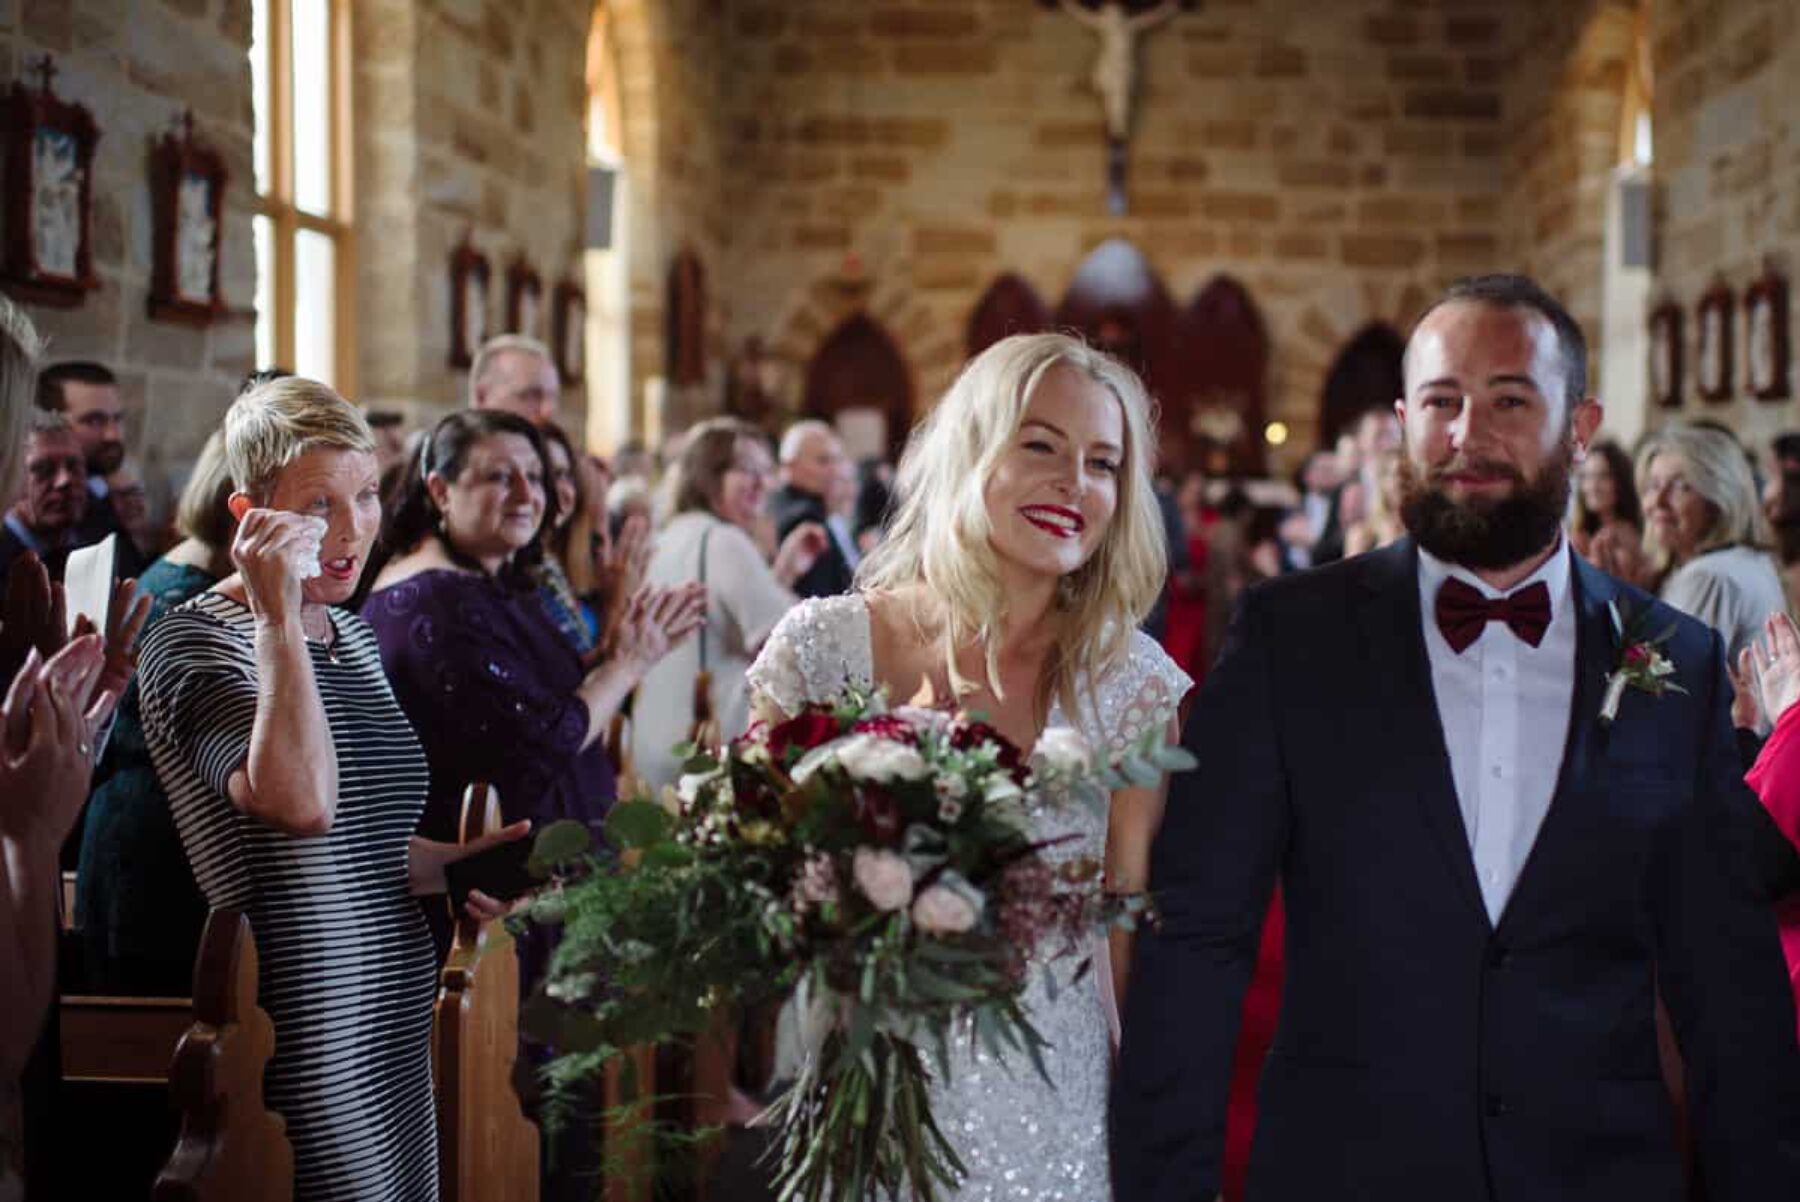 Terrigal wedding at Holy Cross Church / Photography by Keelan Christopher